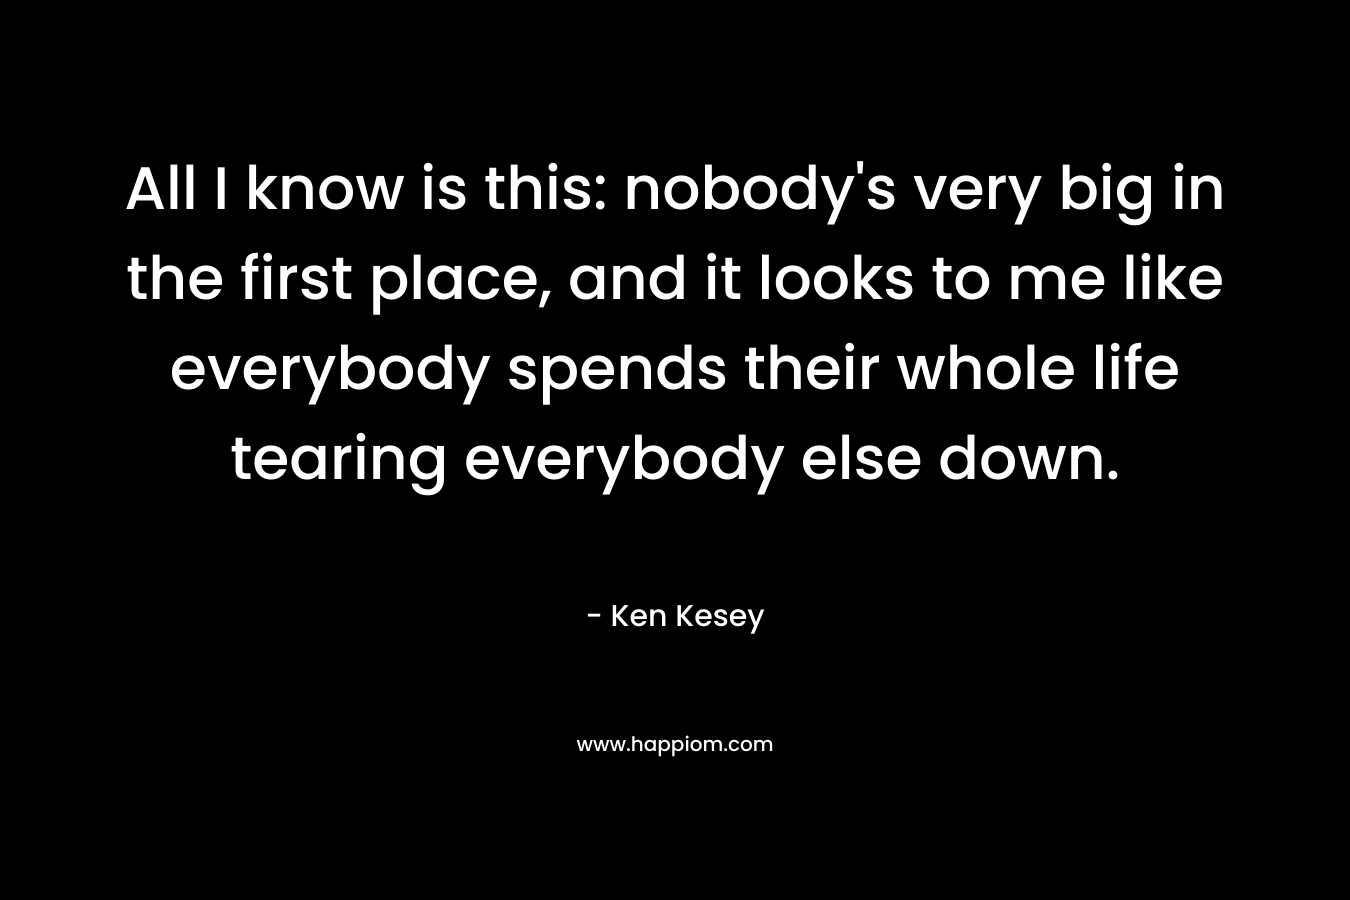 All I know is this: nobody’s very big in the first place, and it looks to me like everybody spends their whole life tearing everybody else down. – Ken Kesey